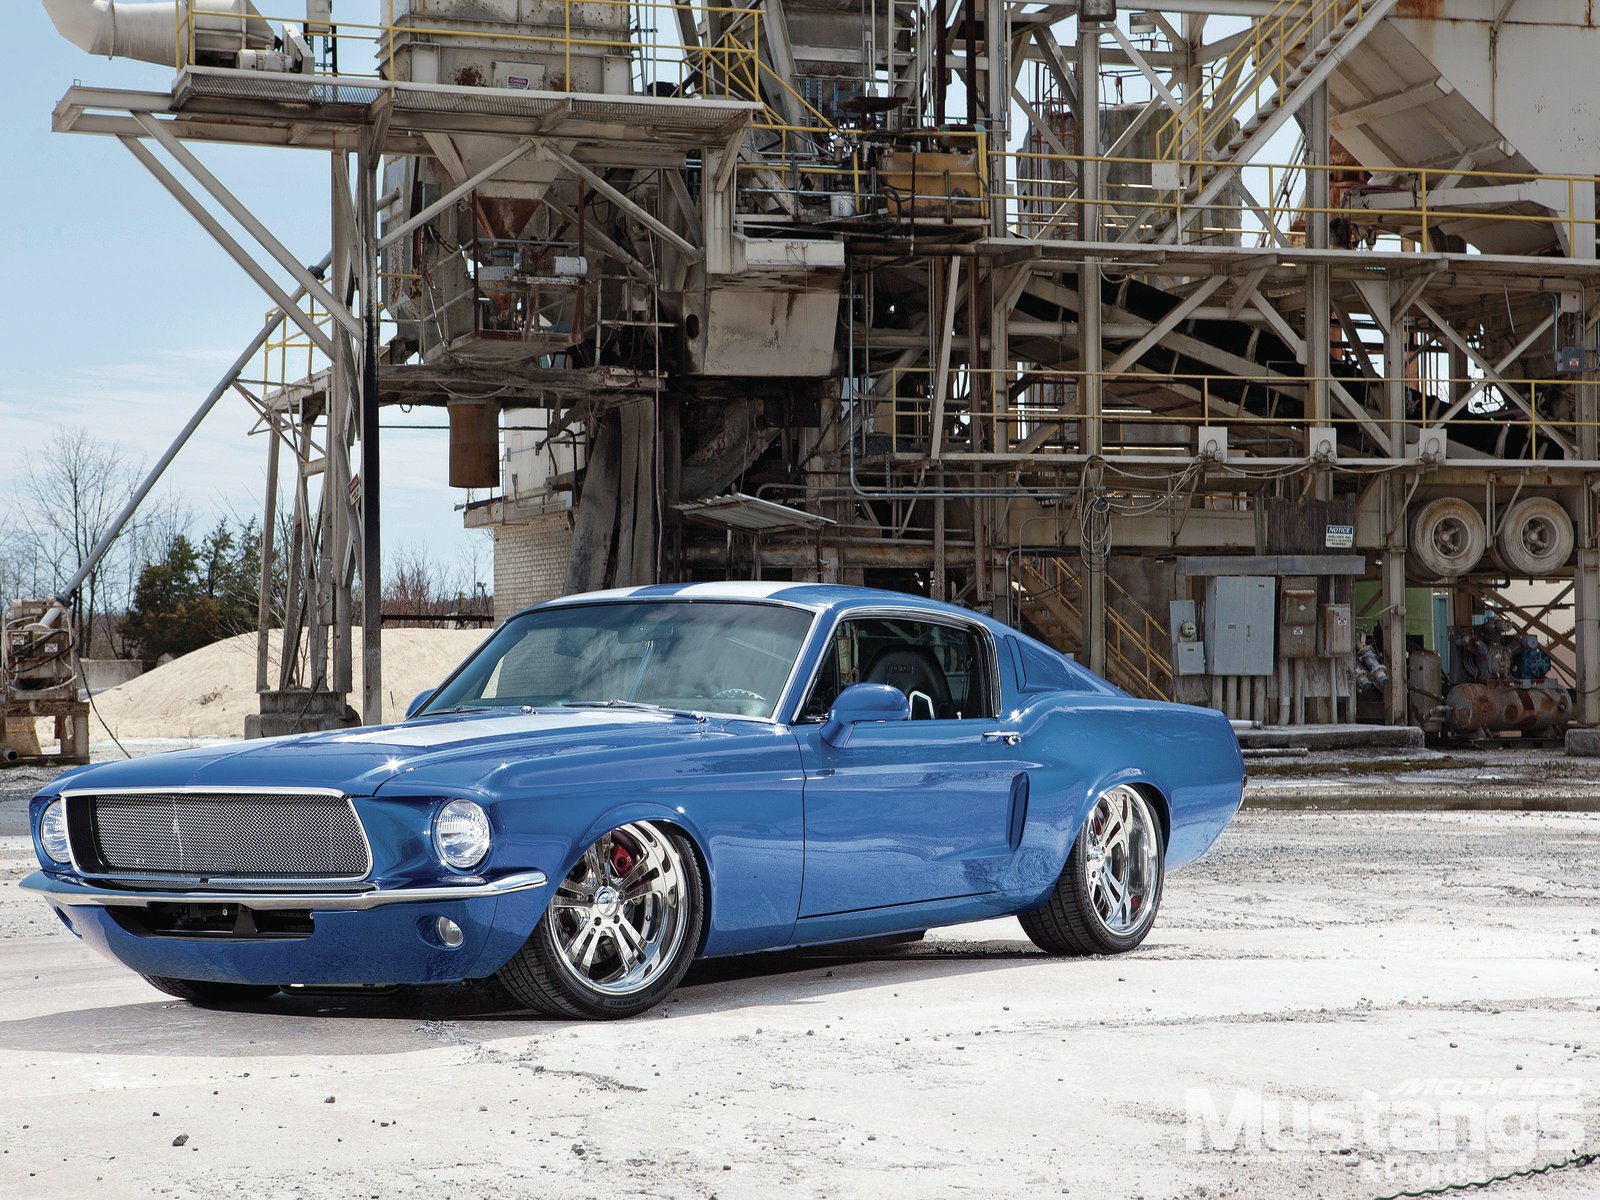 1967, Ford, Mustang, Gt, Fastback, Streetrod, Street, Rod, Hot, Rodeder, Muscle, Super, Low, Tunning, Usa, 1600x1200 04 Wallpaper